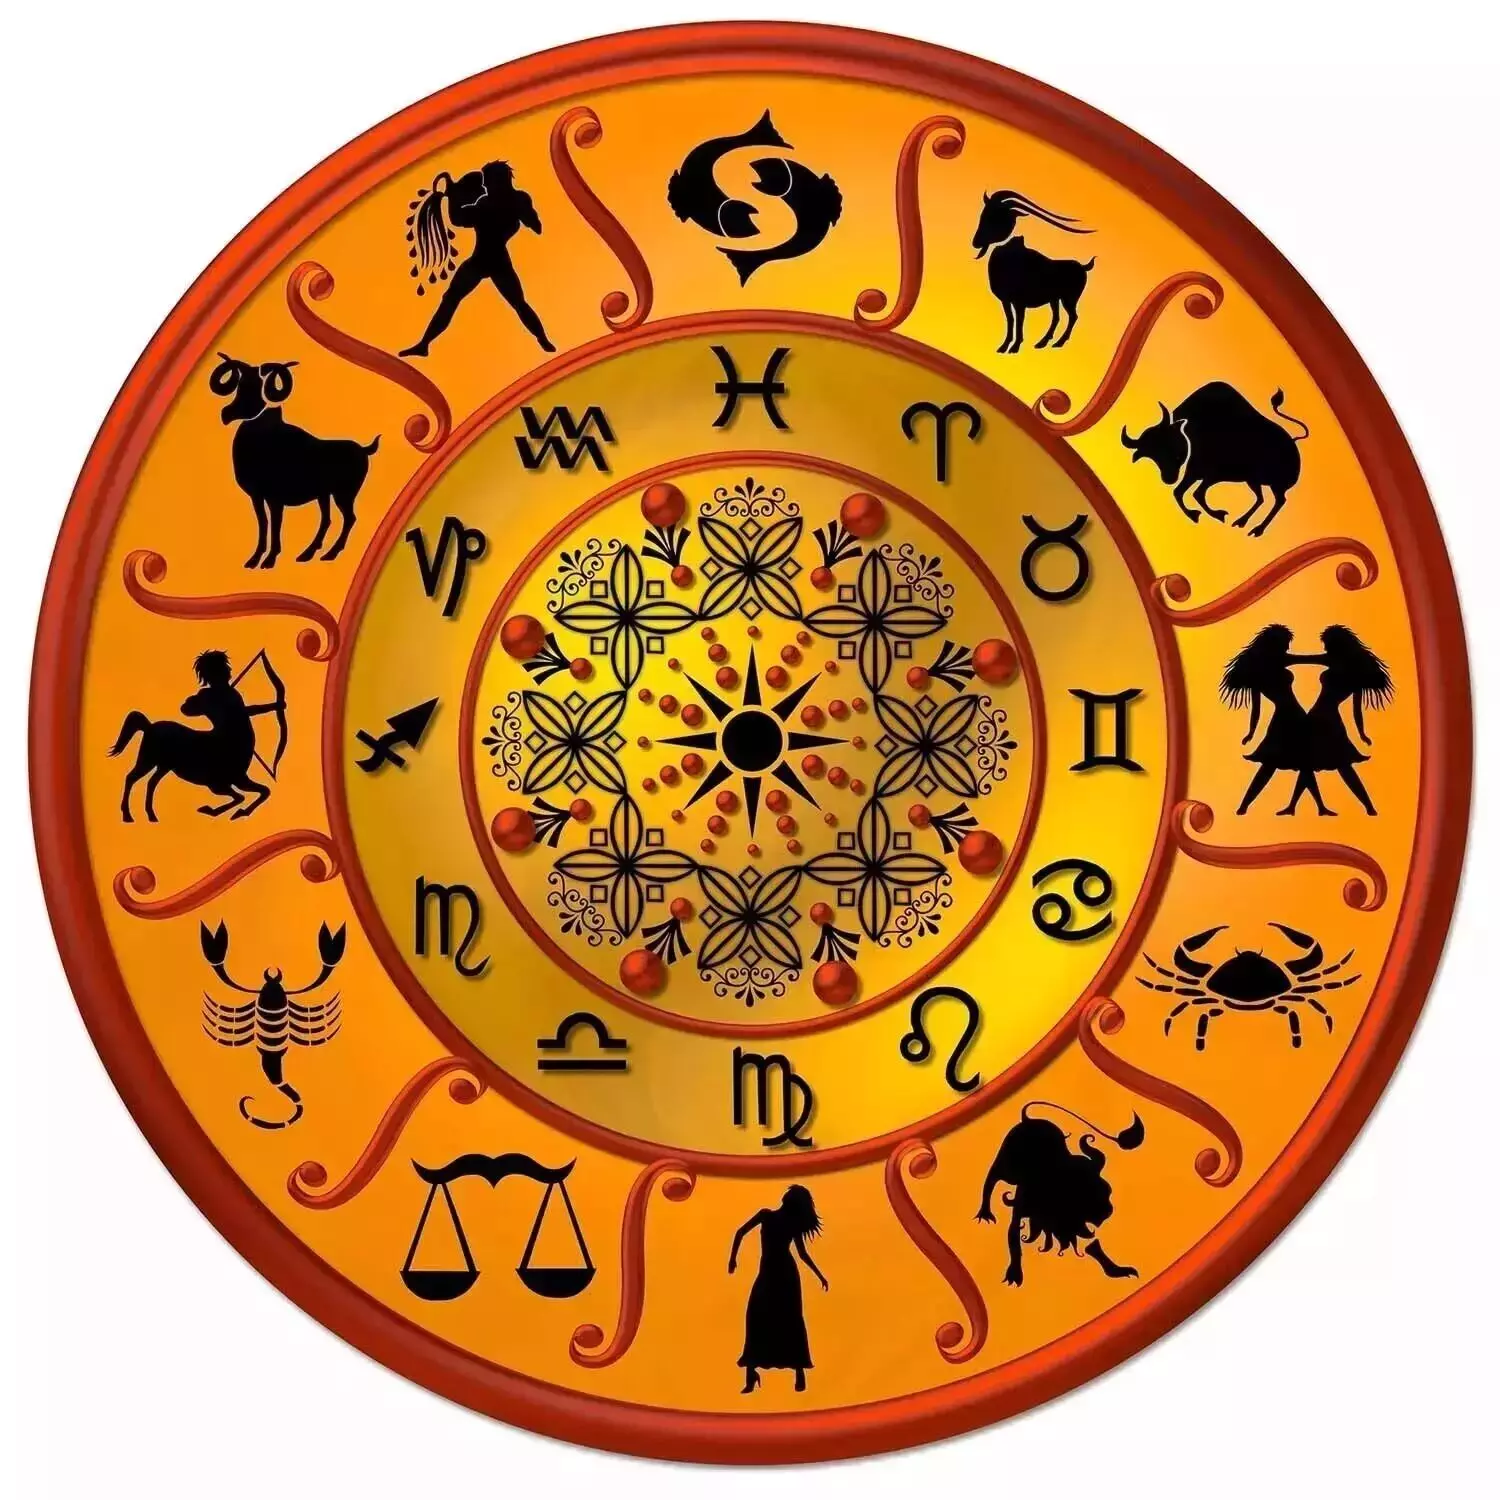 05 December – Know your todays horoscope